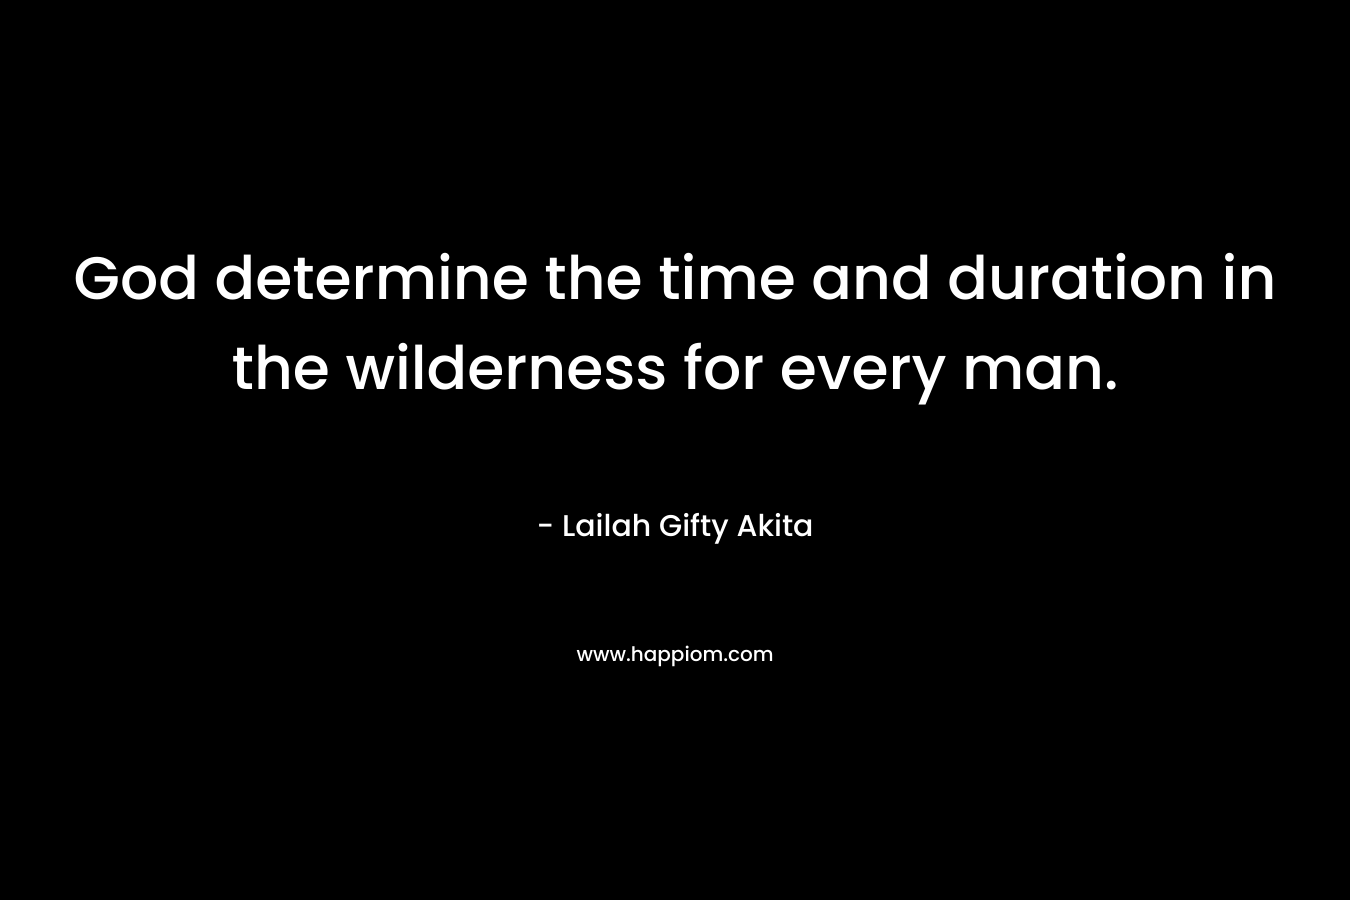 God determine the time and duration in the wilderness for every man.